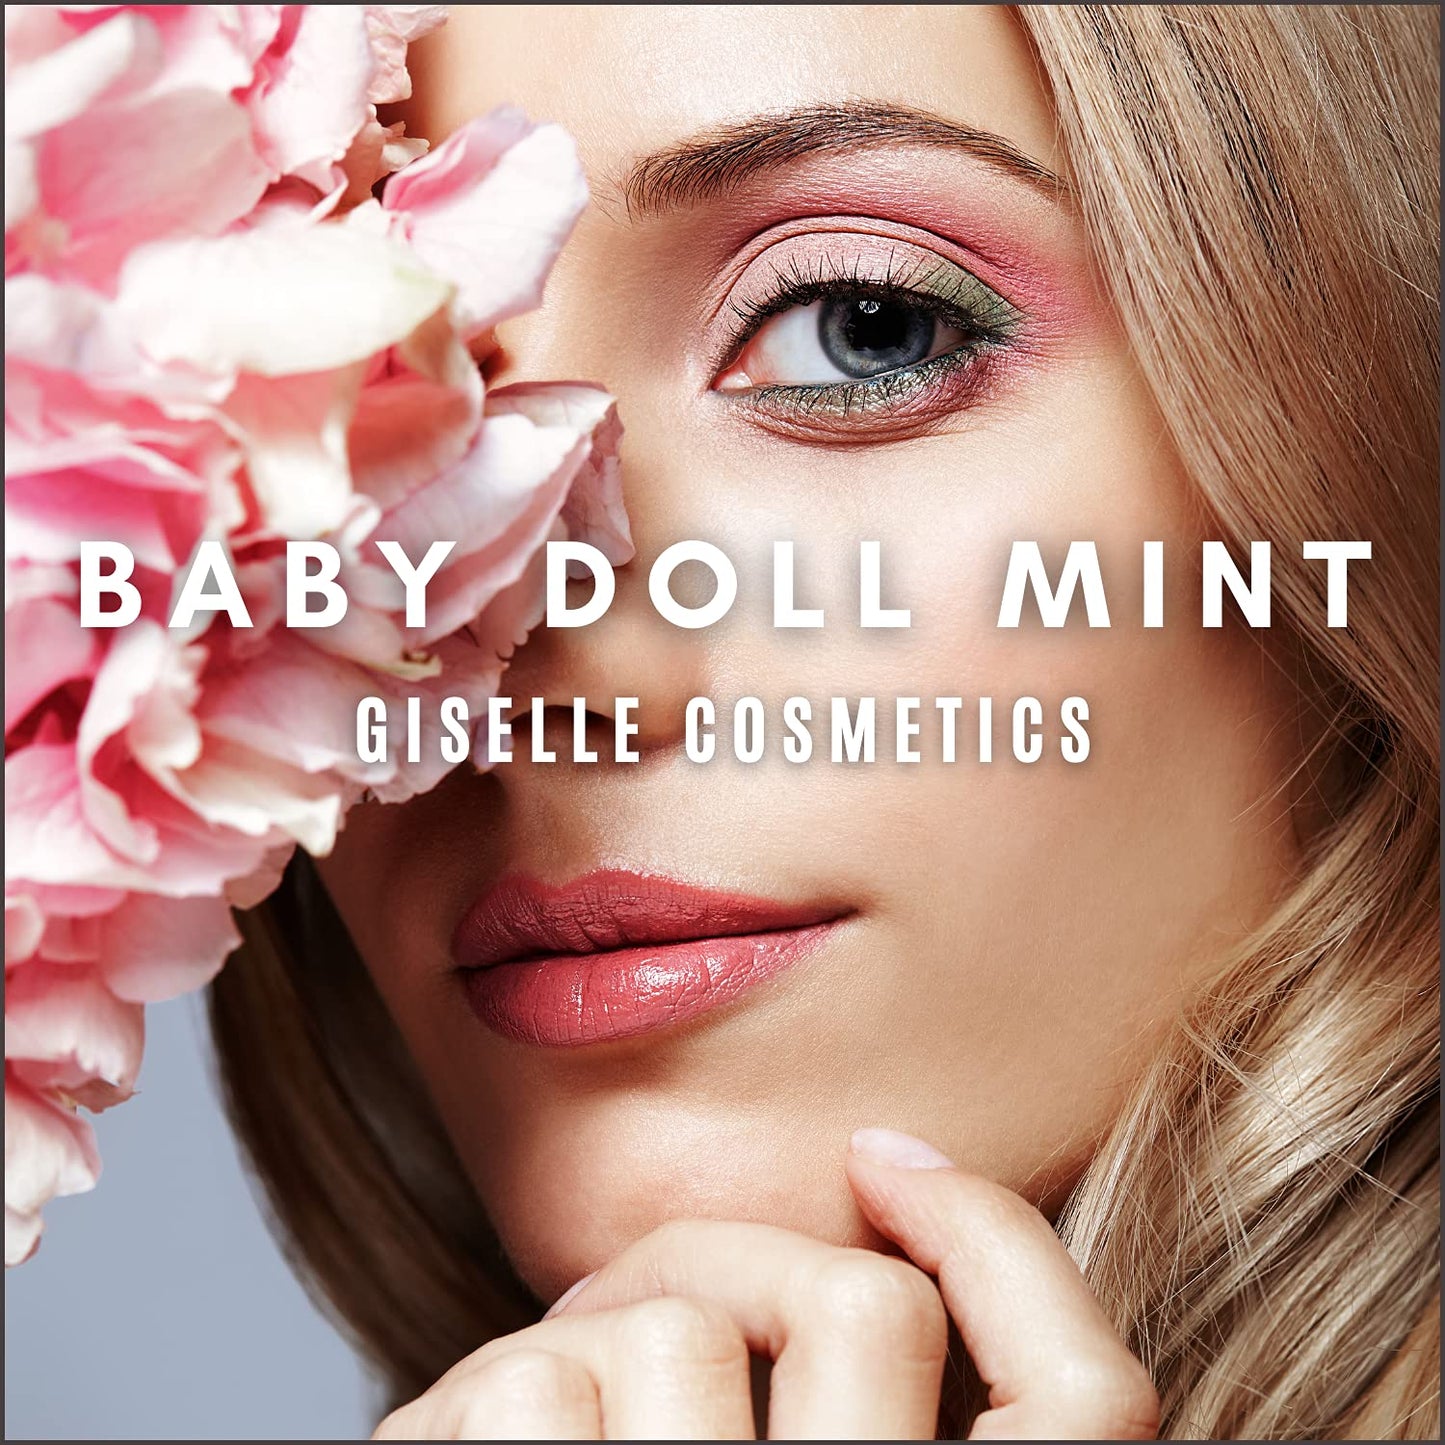 Baby Doll Mint